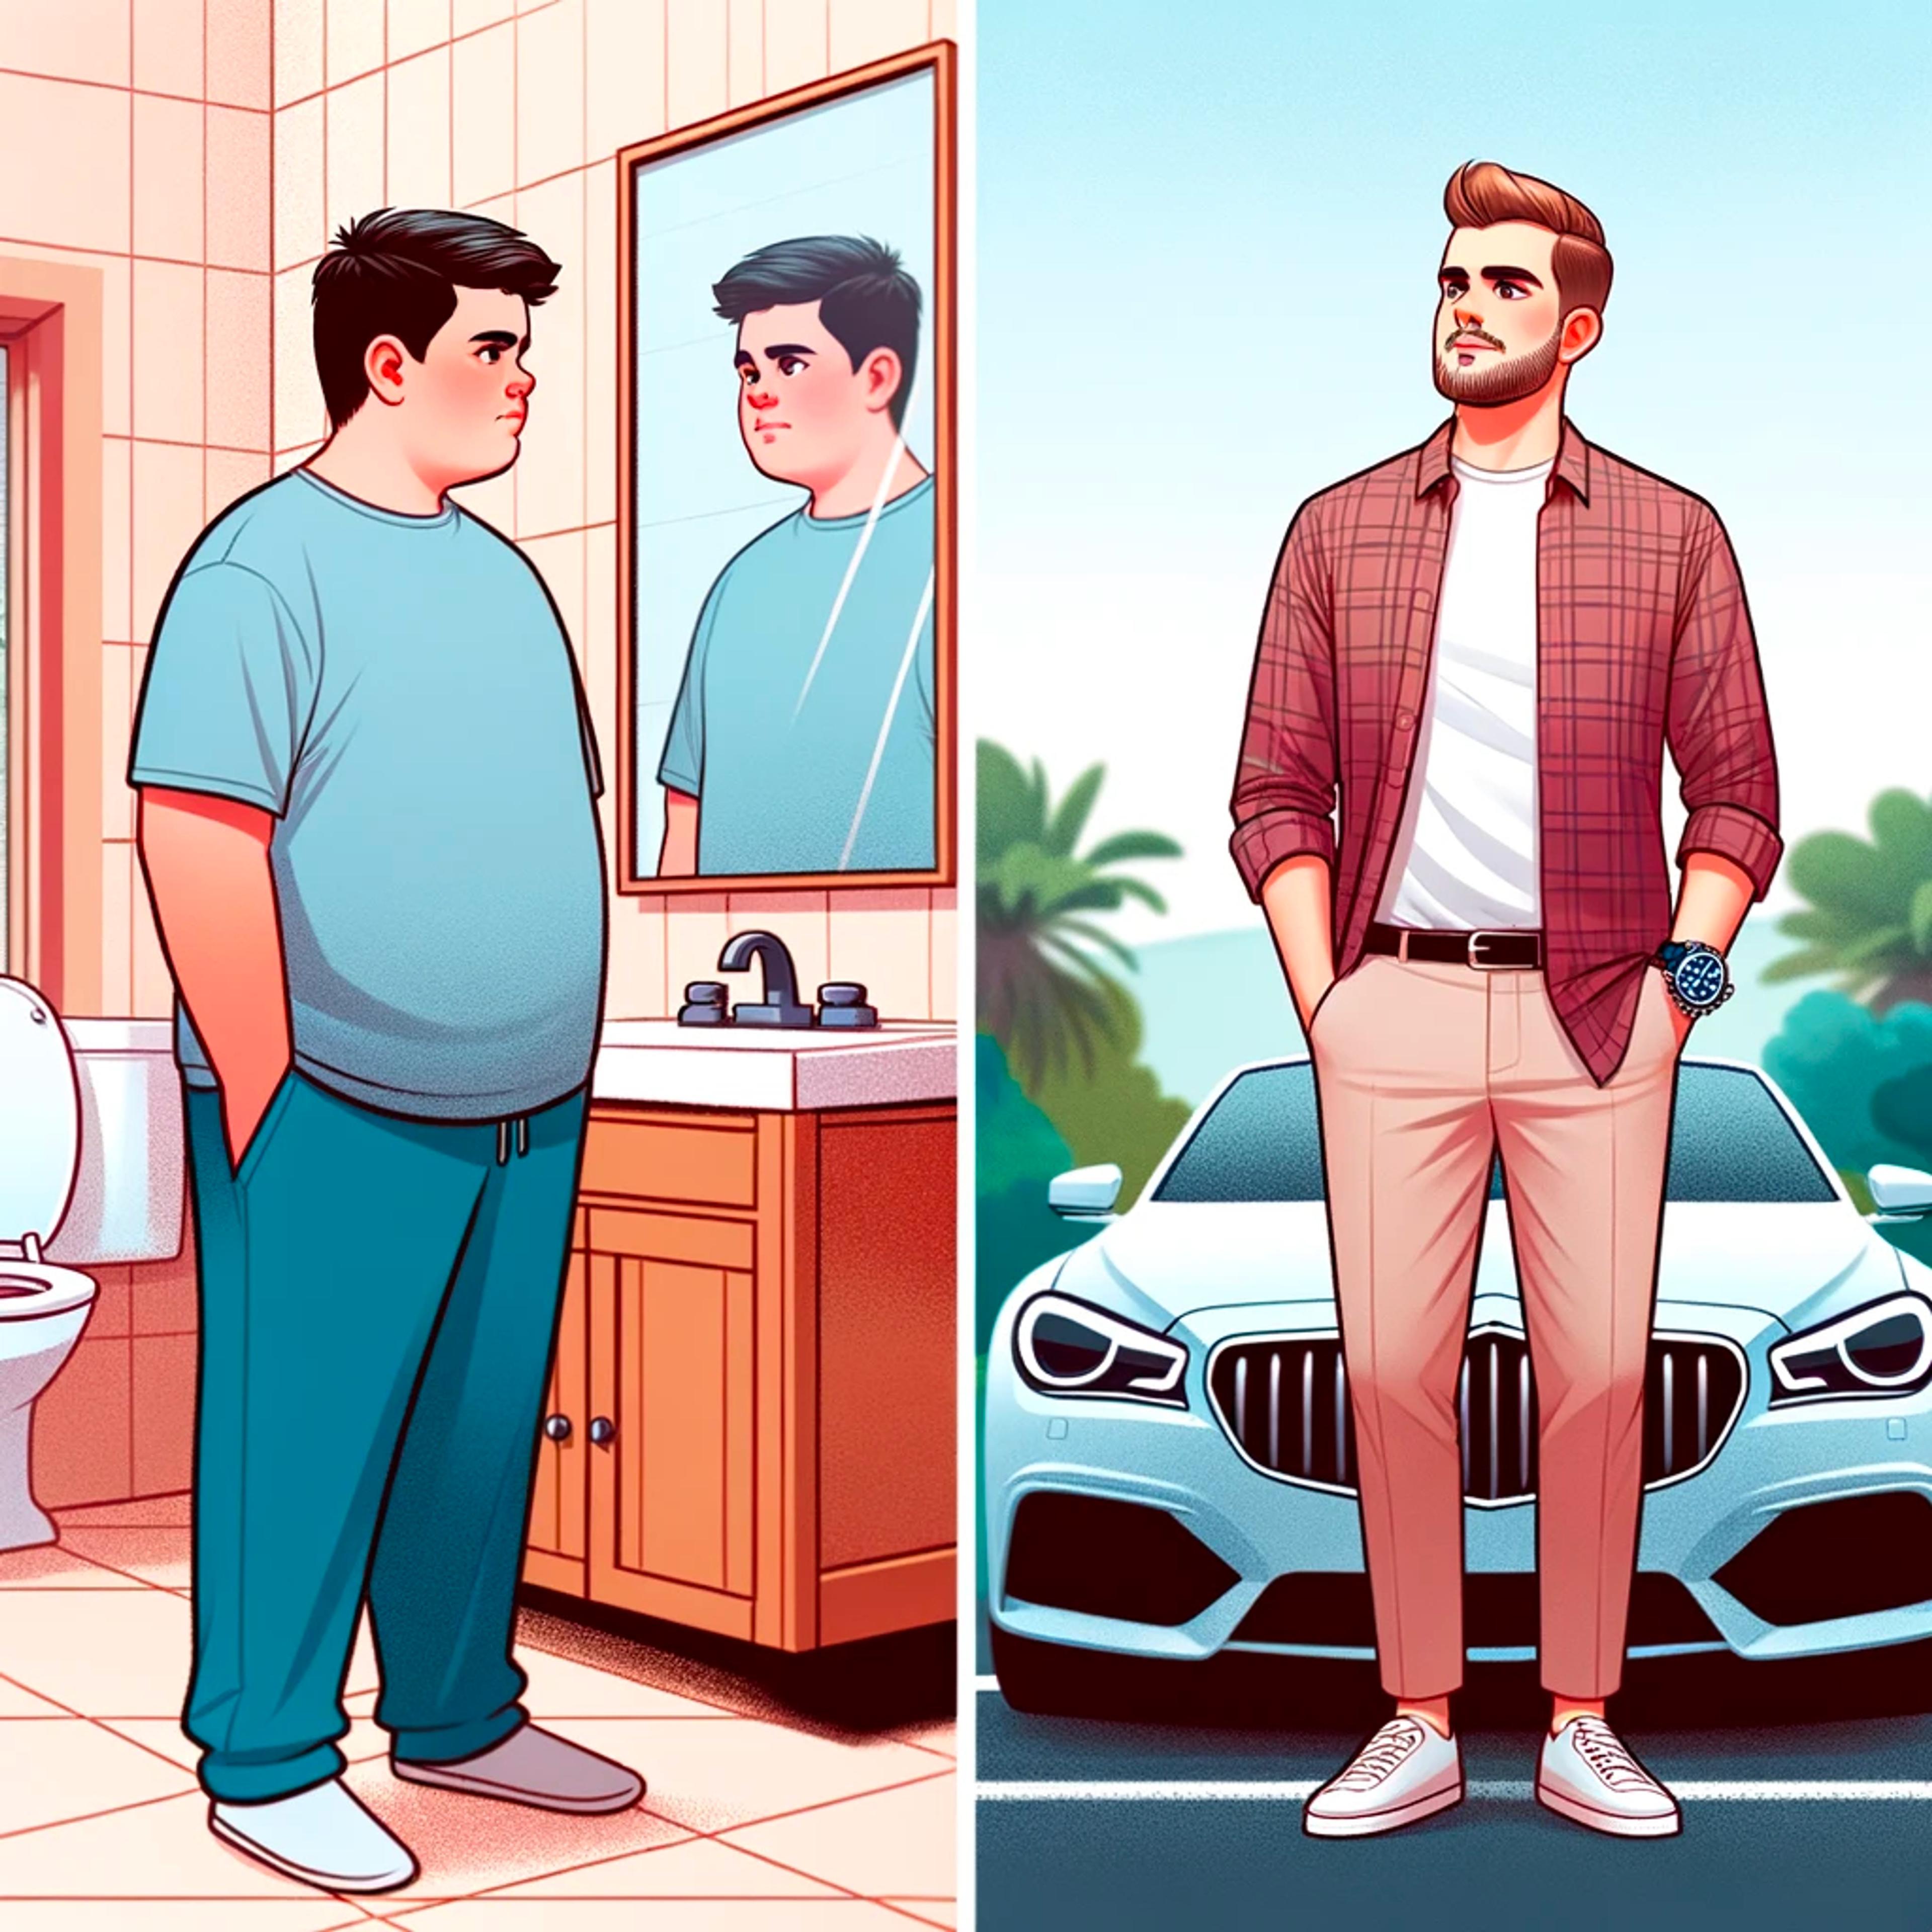 On left, overweight boy looking in bathroom mirror, on right, in shape and handsome man in front of a fancy car.